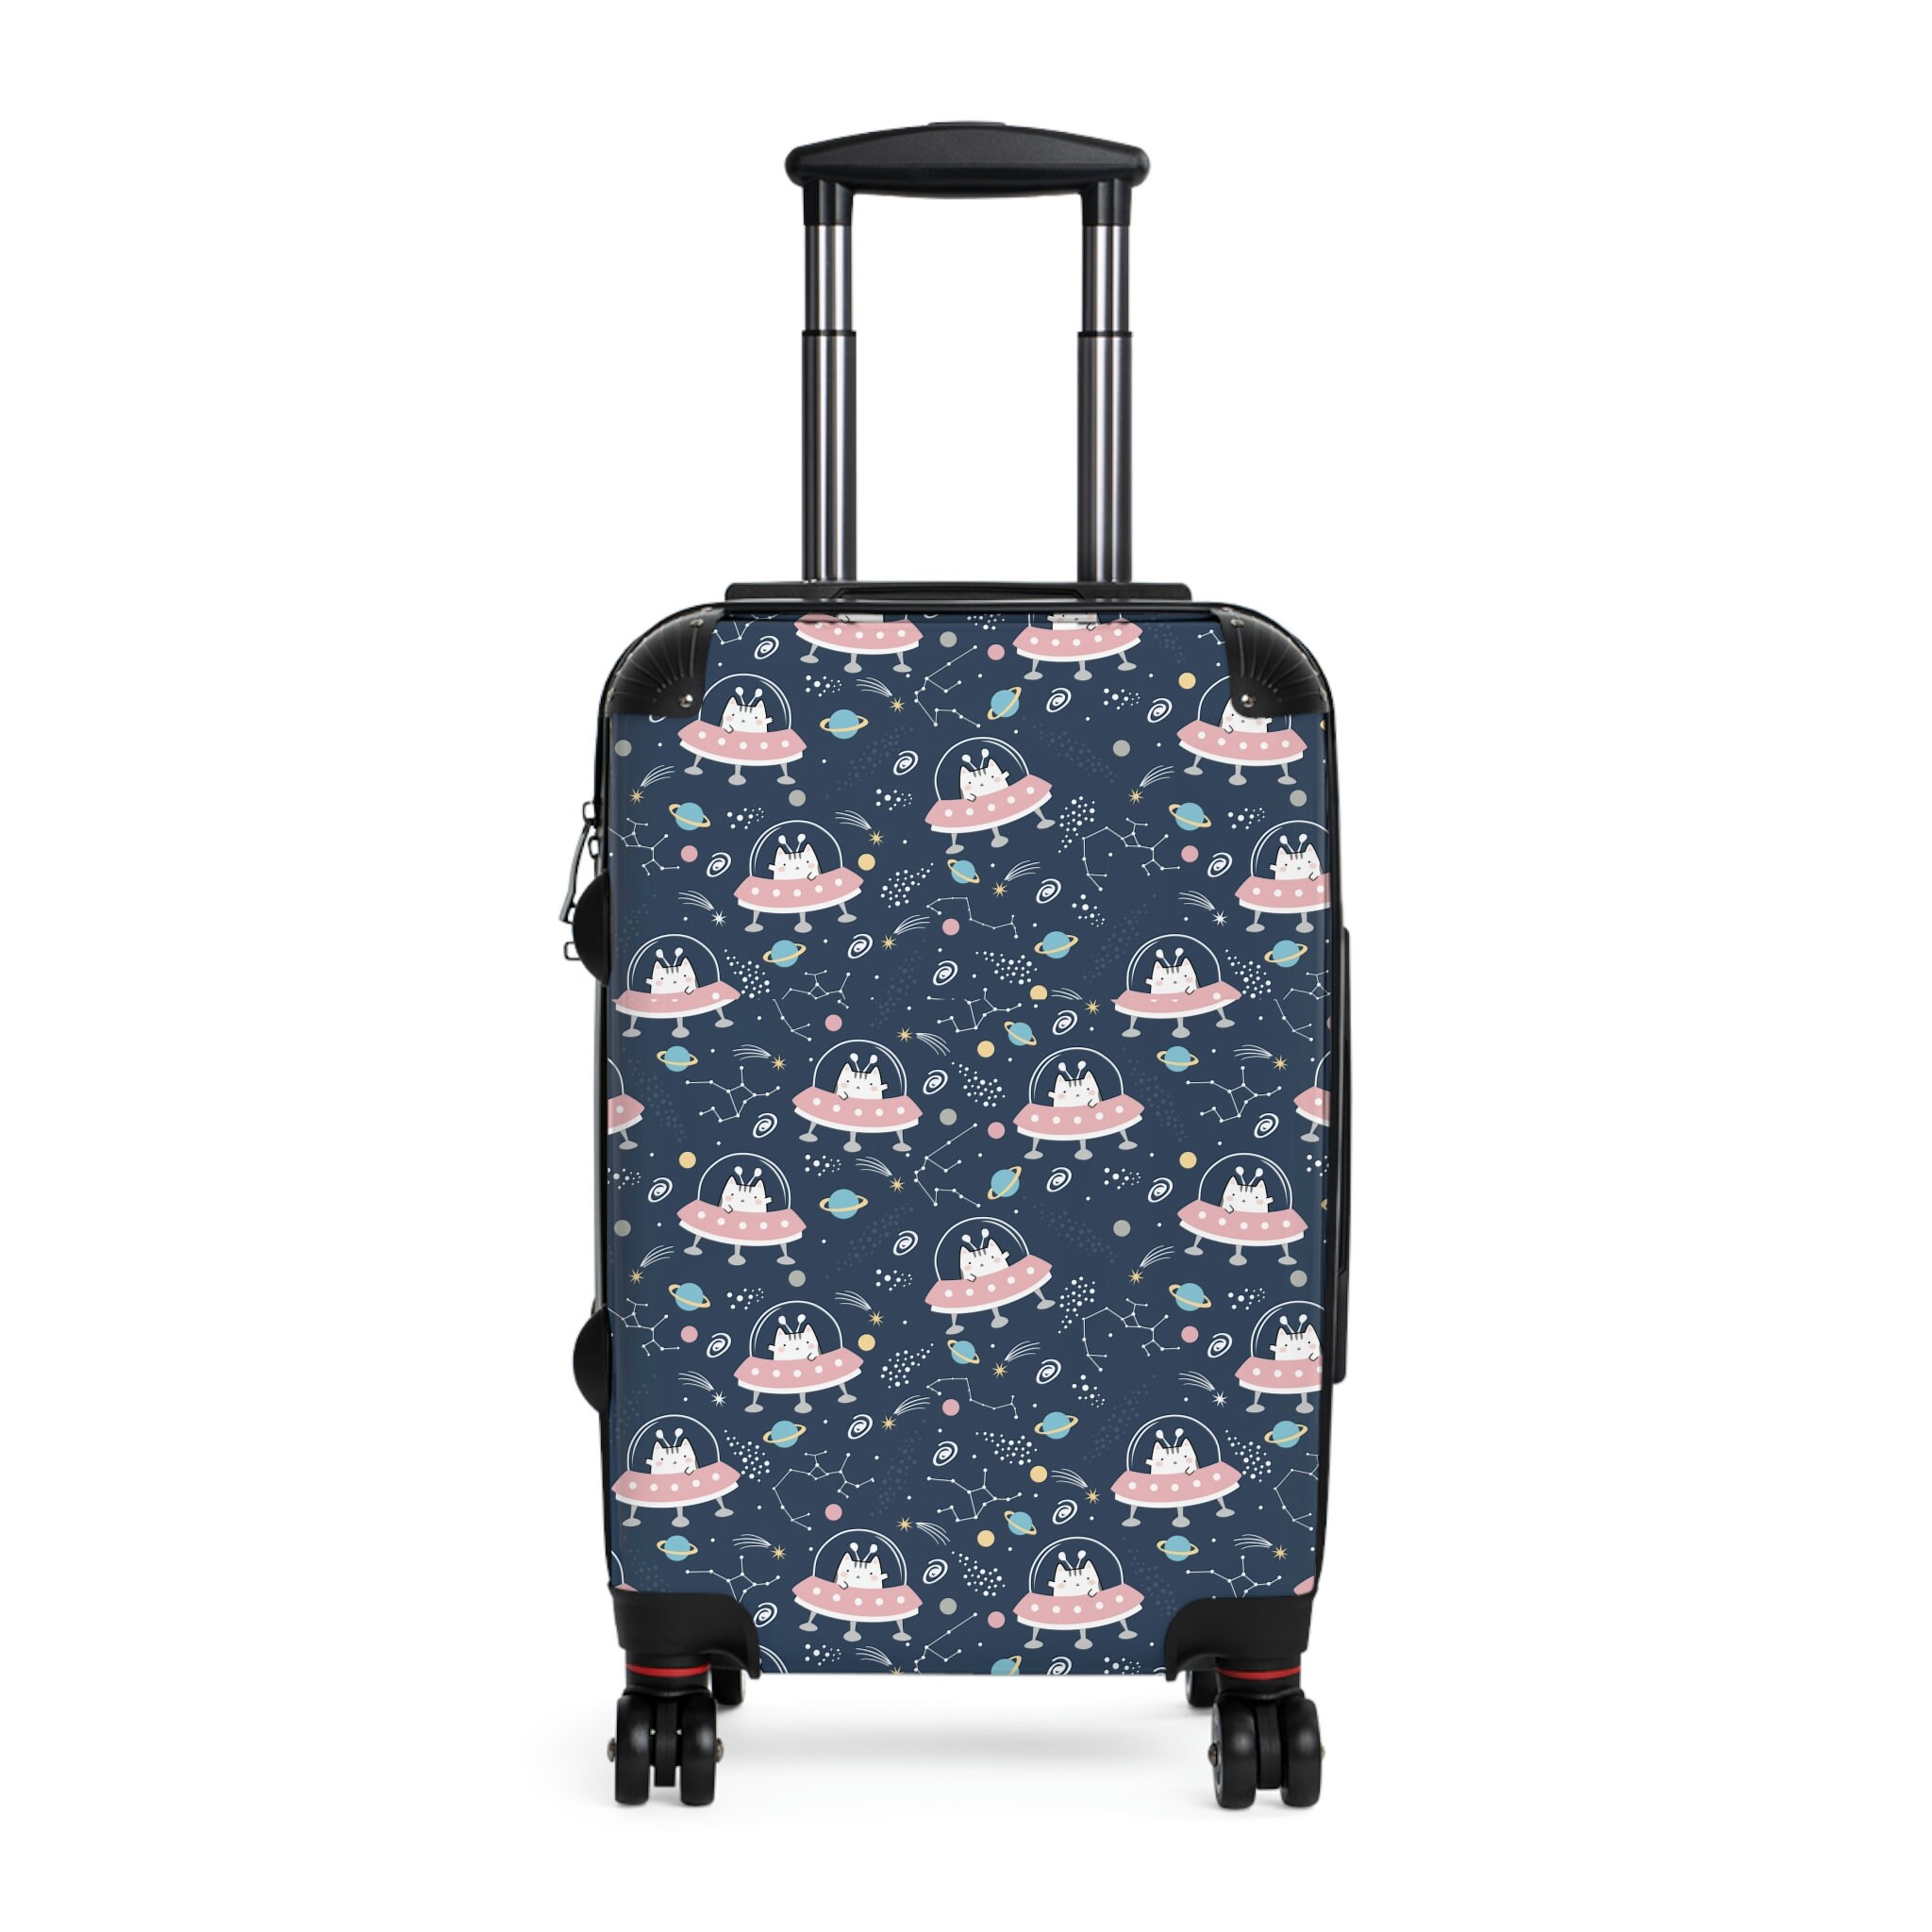 Kids Carry On Suitcase with Wheels, Space Cat Kawaii Style Suitcases on Wheels, Planets Cabin Suitcase Wheels, Cabin Suitcase High Quality